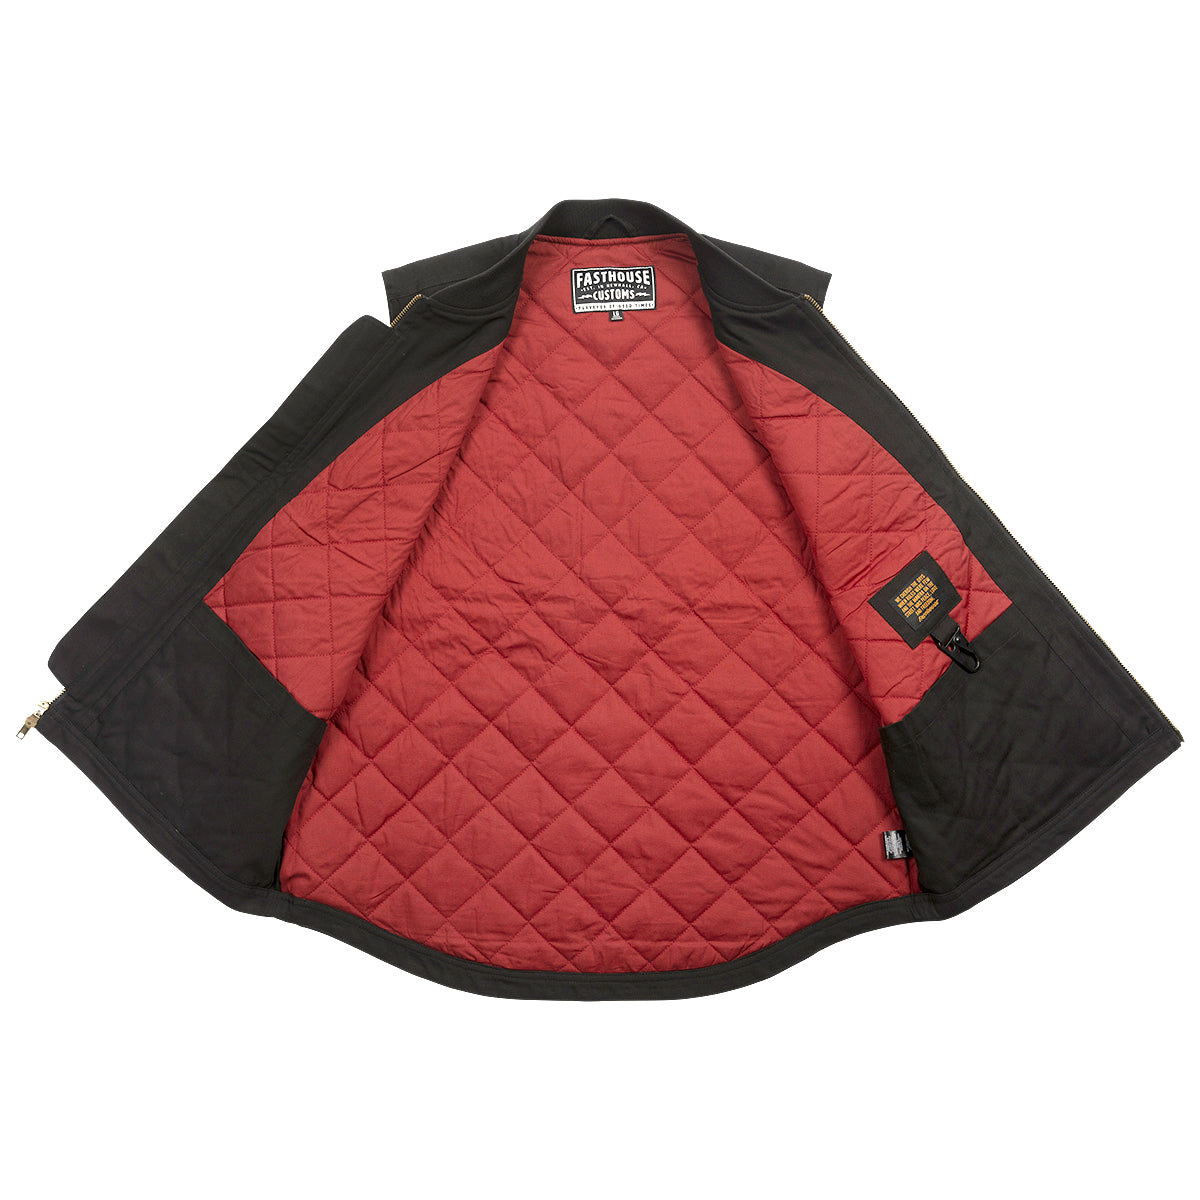 Fasthouse Grafter Vest